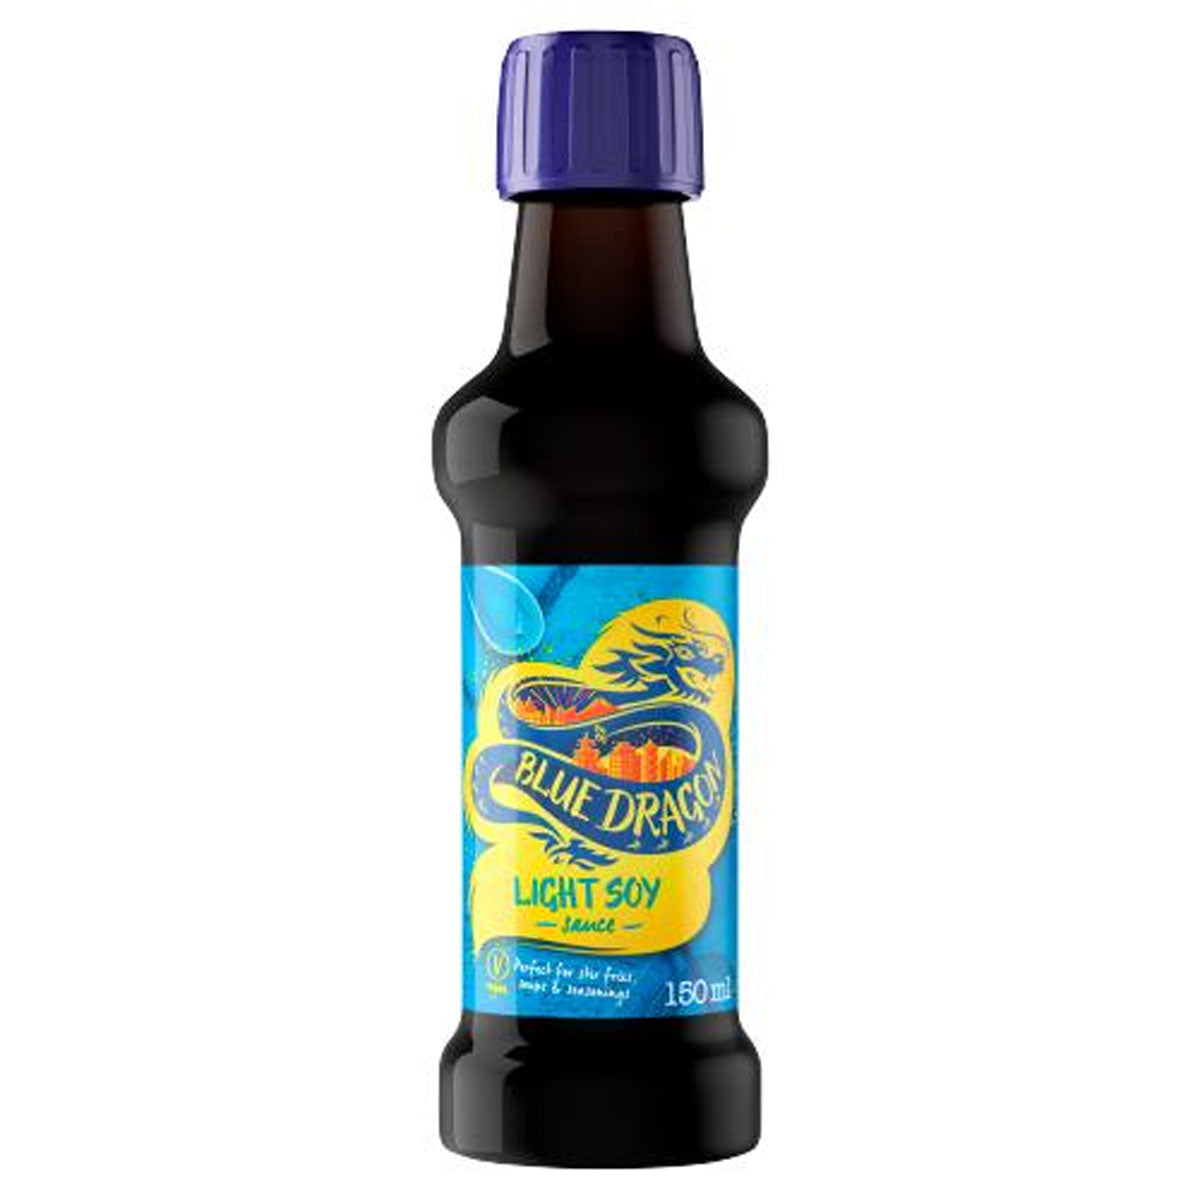 A bottle of Blue Dragon - Light Soy Sauce - 150ml with a blue lid.